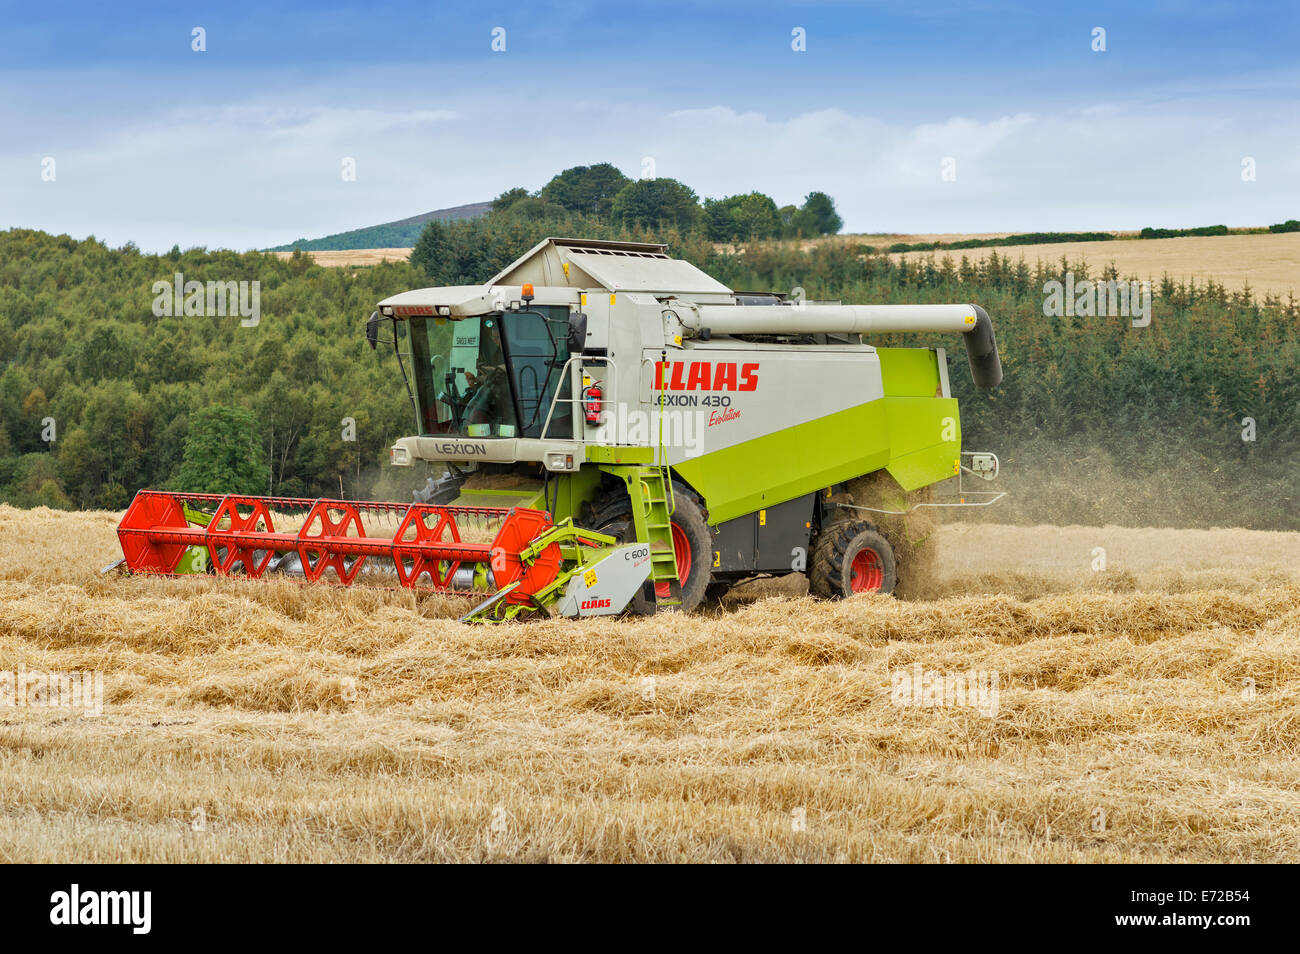 COMBINE HARVESTER ABERDEENSHIRE SCOTLAND COMPLETES THE MOWING OF A FIELD OF BARLEY Stock Photo